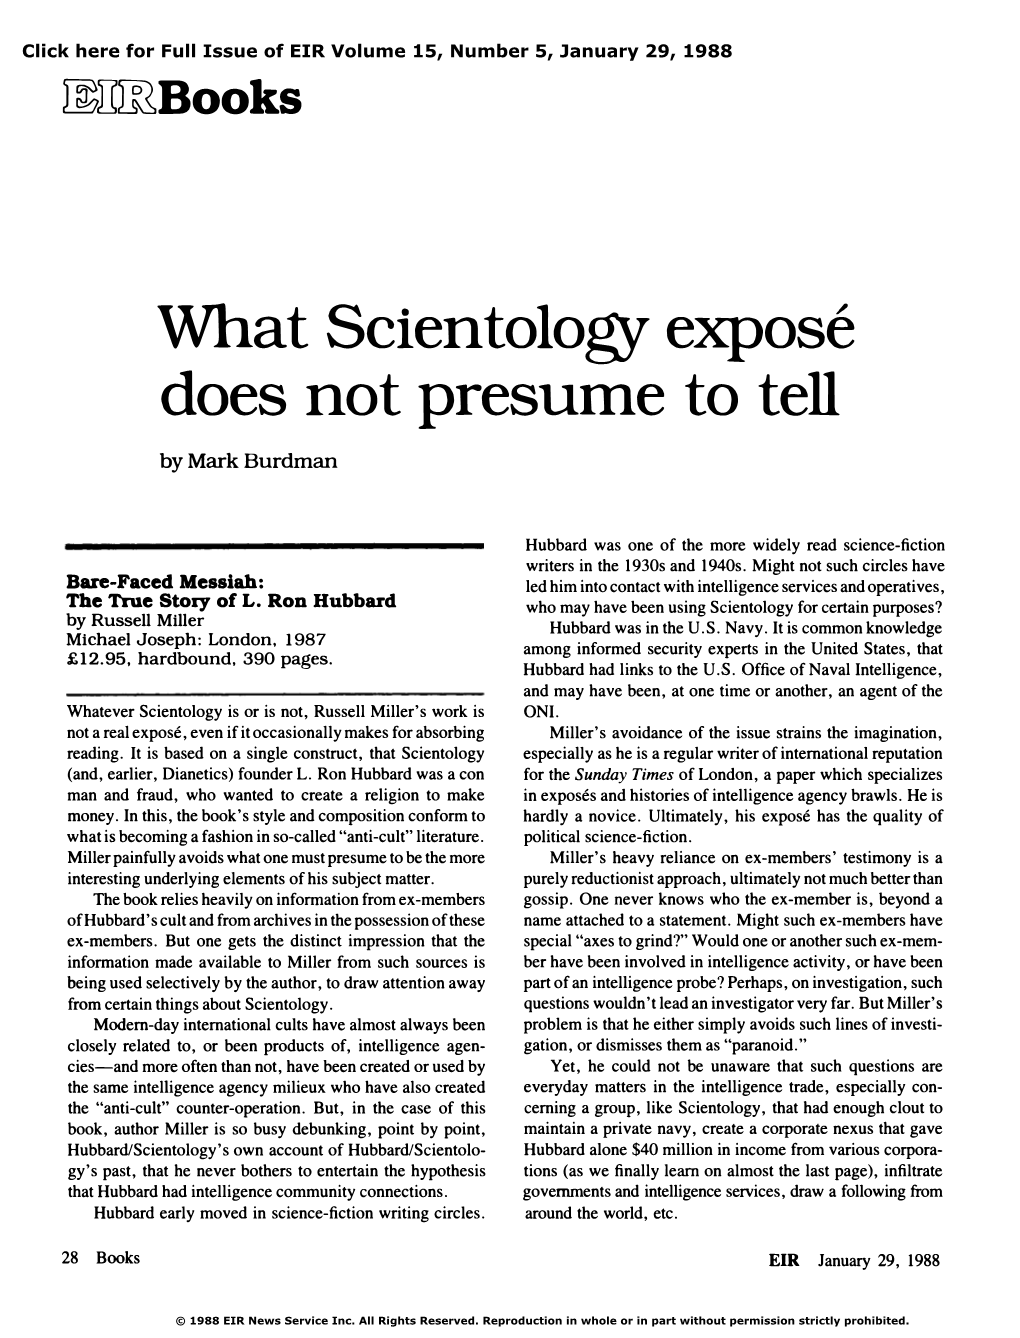 What Scientology Exposé Does Not Presume to Tell